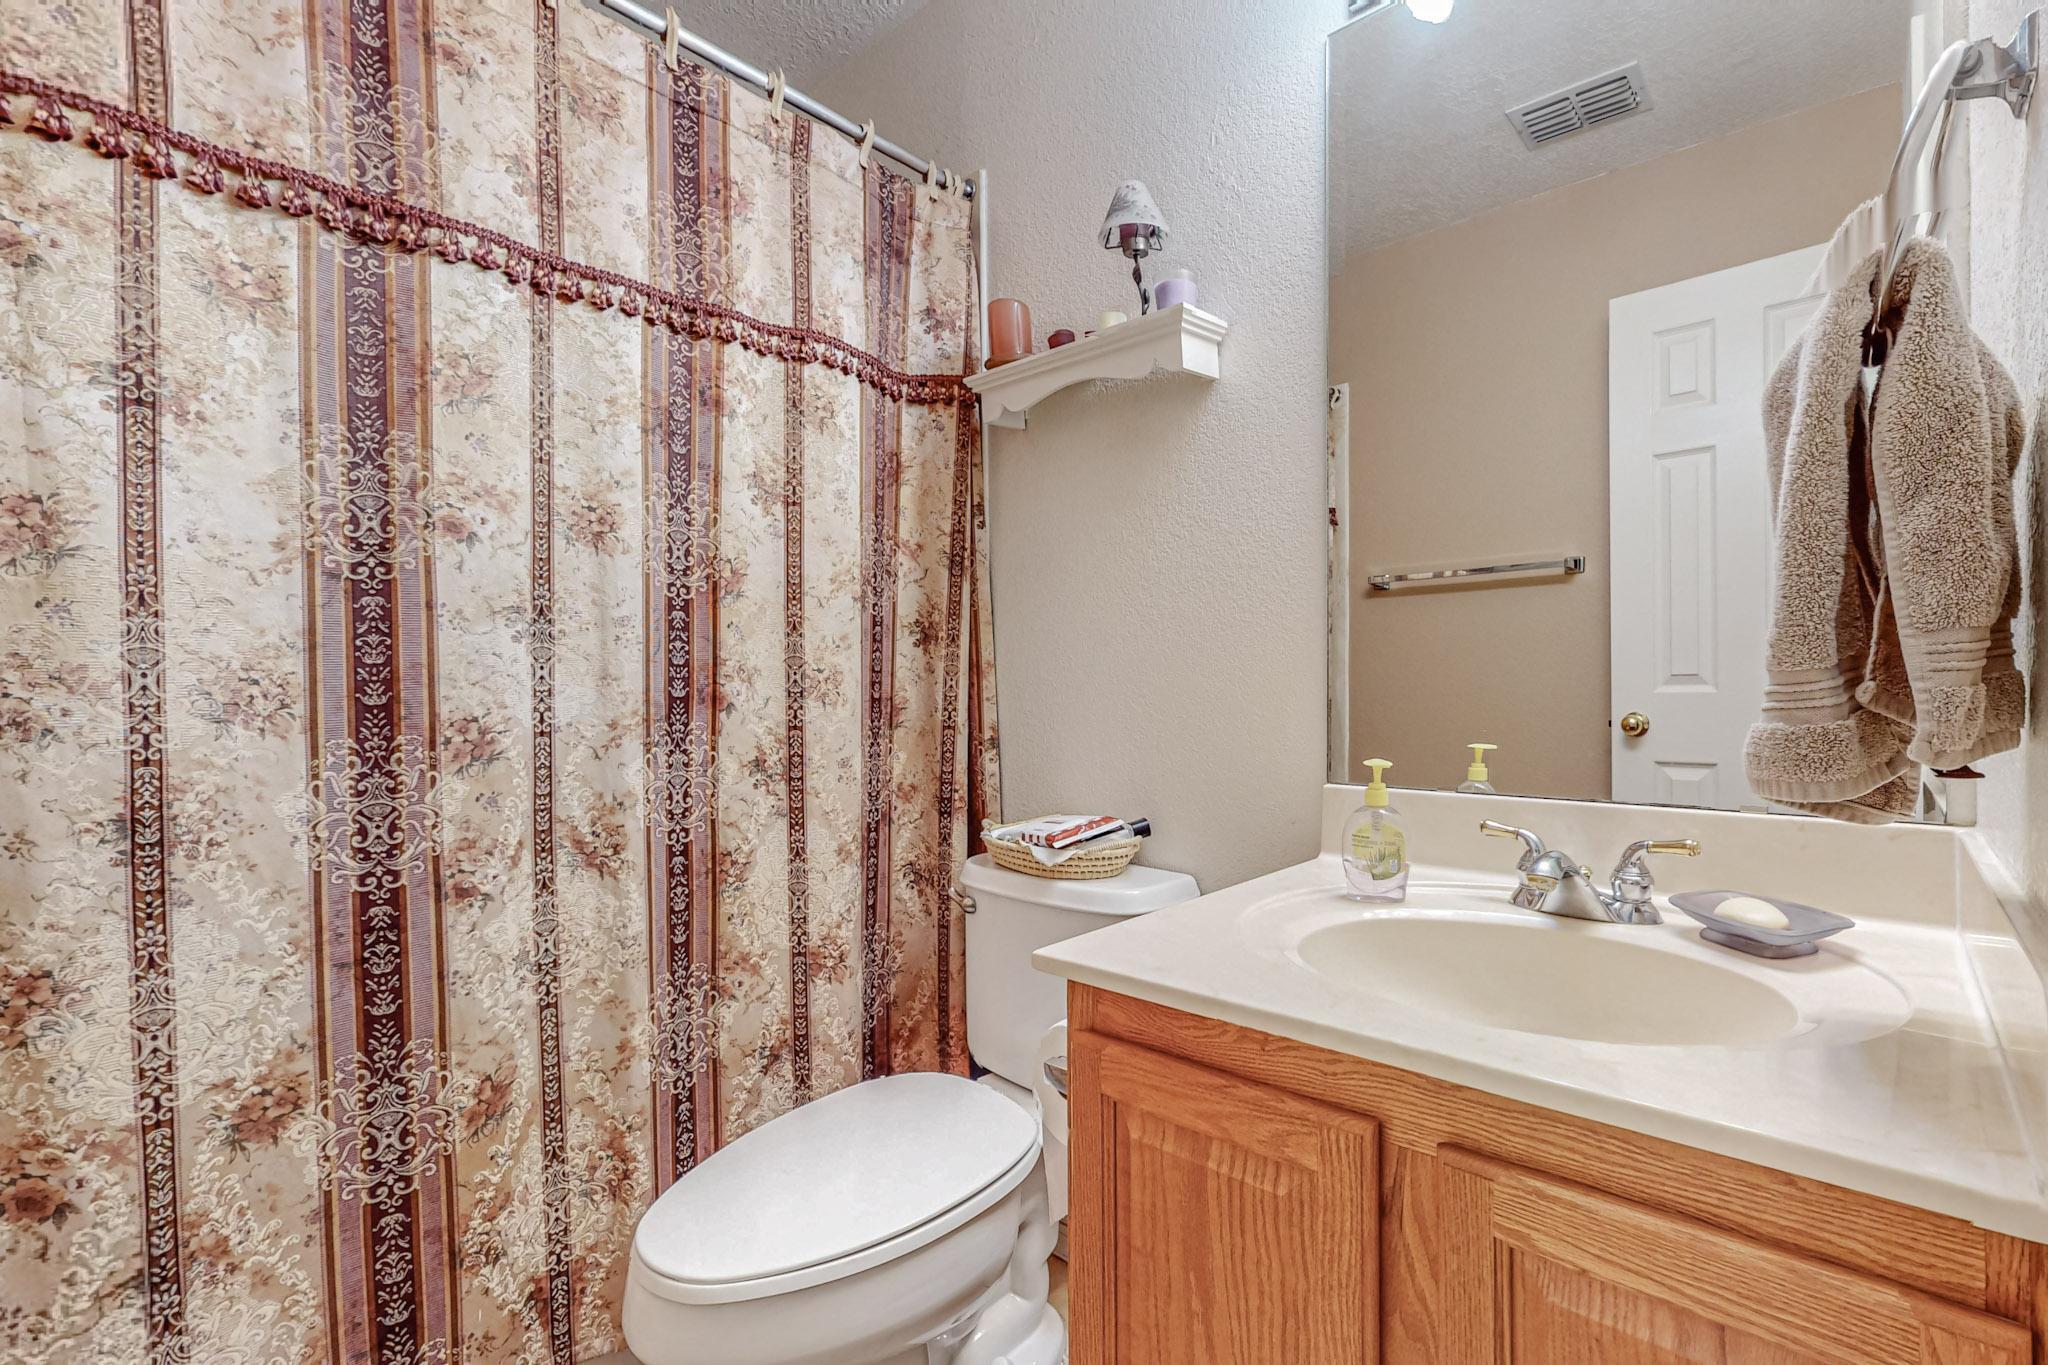 4212 Caprock Road NW, Albuquerque, New Mexico 87114, 4 Bedrooms Bedrooms, ,3 BathroomsBathrooms,Residential,For Sale,4212 Caprock Road NW,1061563